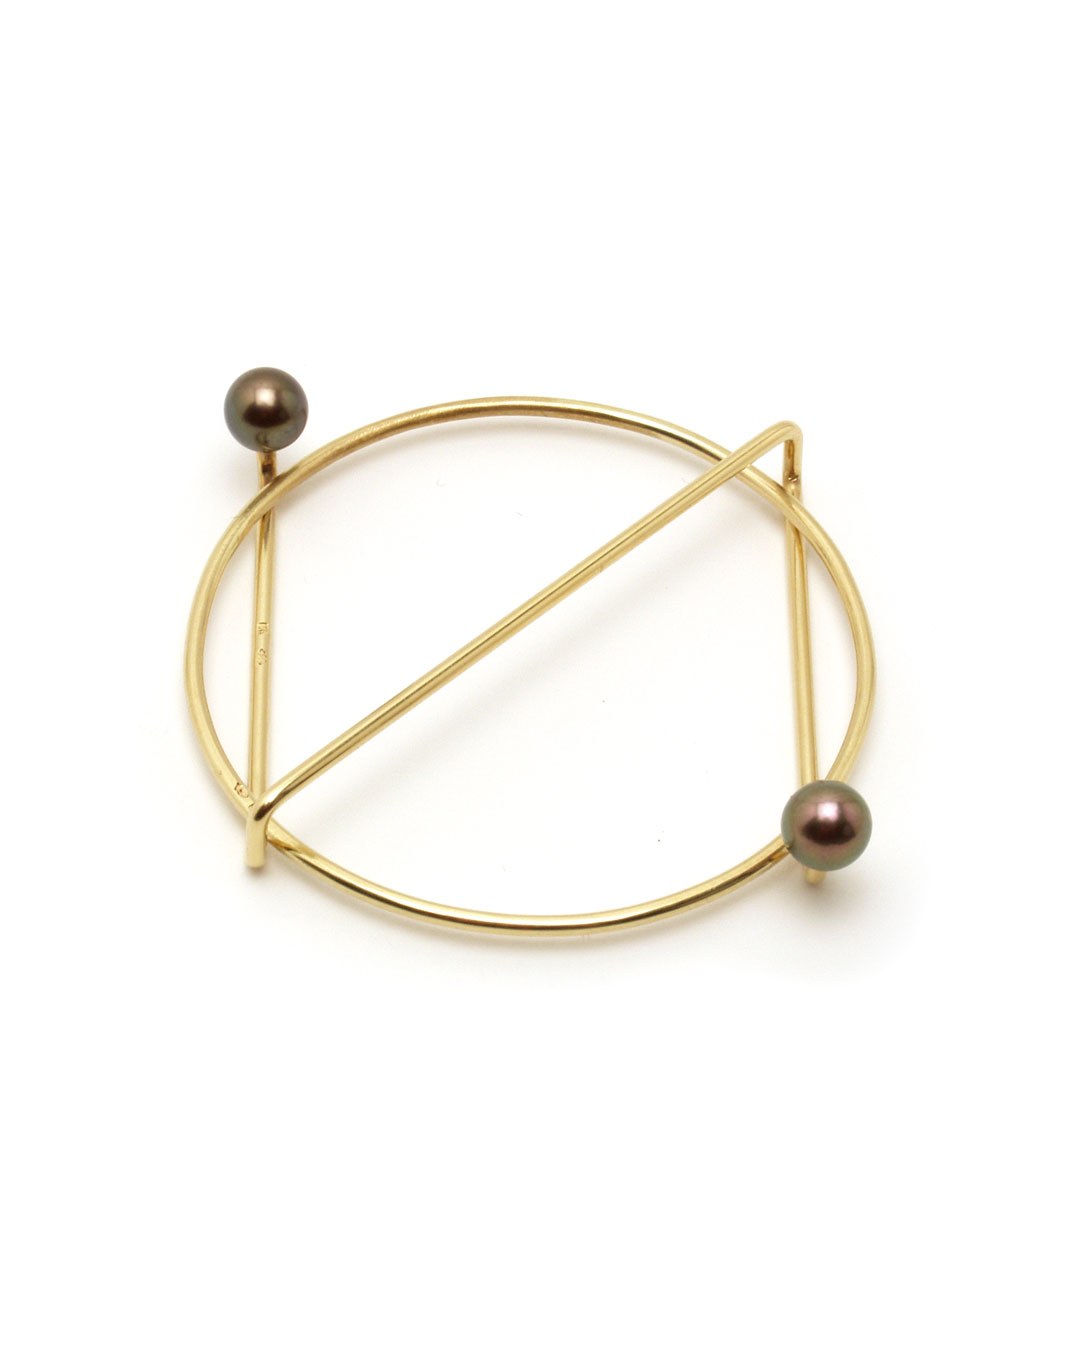 Herman Hermsen, untitled, 1989, brooch; 14ct yellow gold, pearls, 60 x 50 x 10 mm, €1275